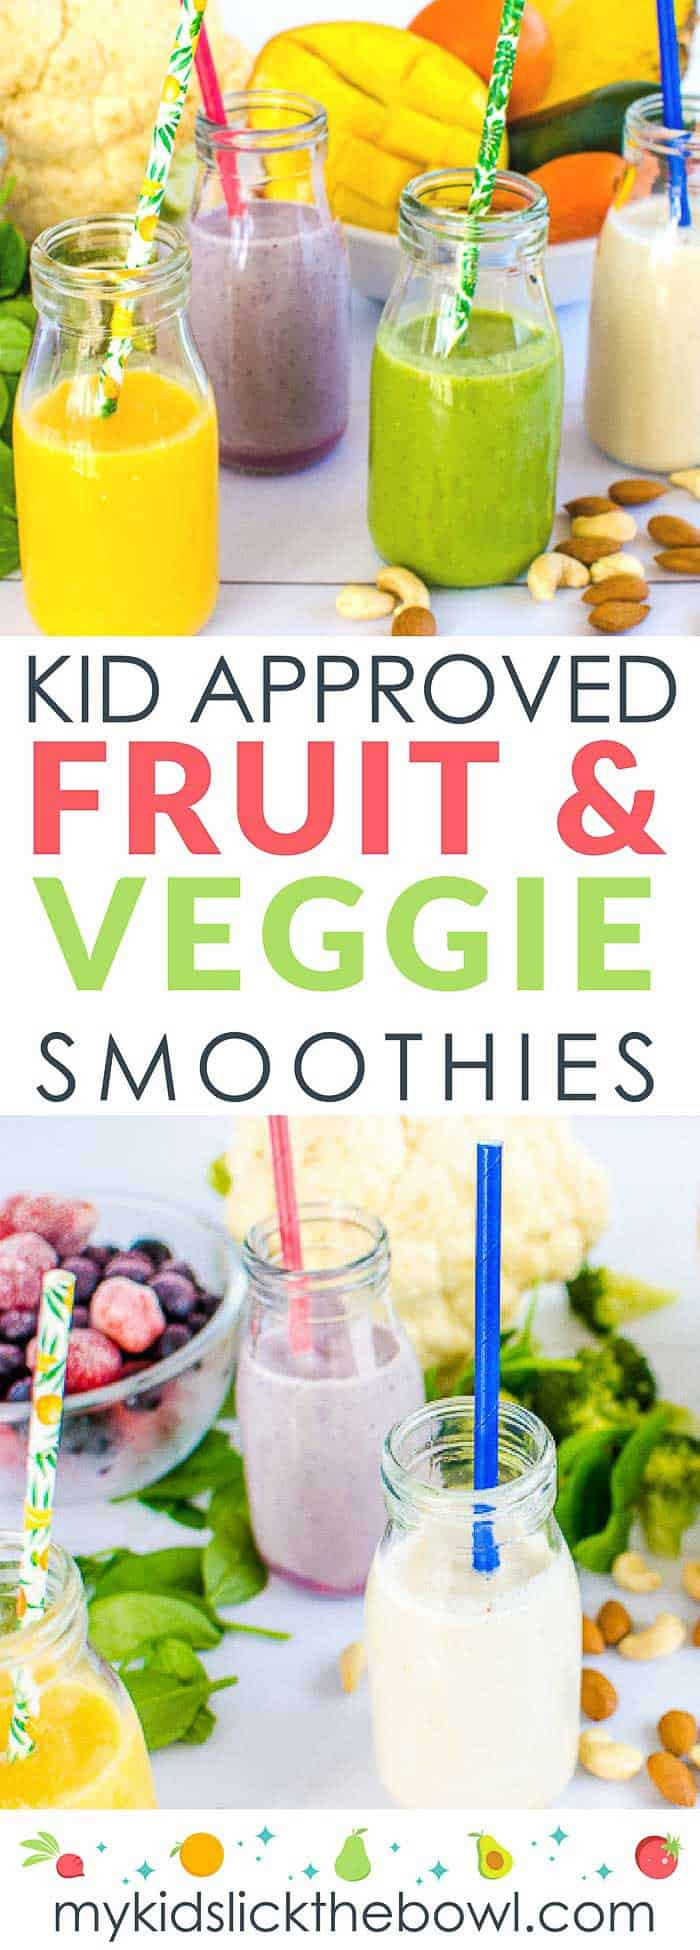 Veg And Fruit Smoothies
 Fruit and Veggie Smoothies For Kids